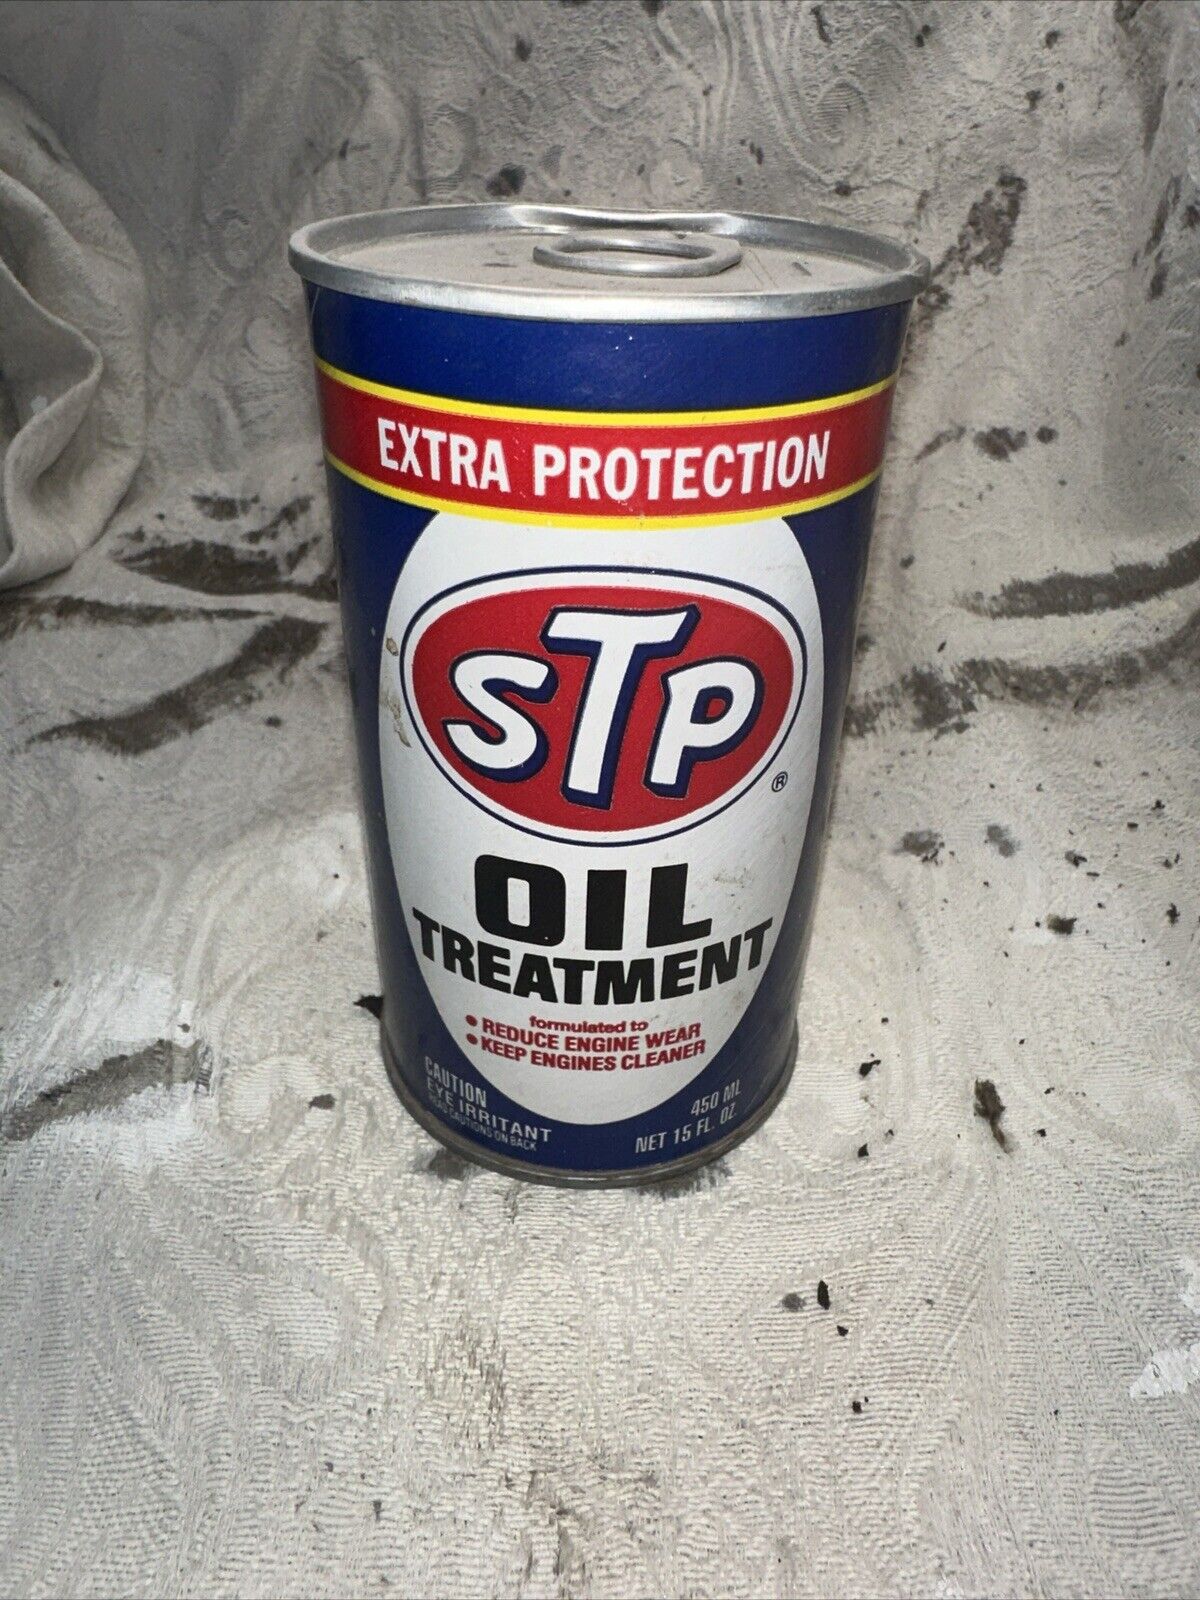 Very Rare Unopened Empty Can Vintage STP New Improved Oil Treatment